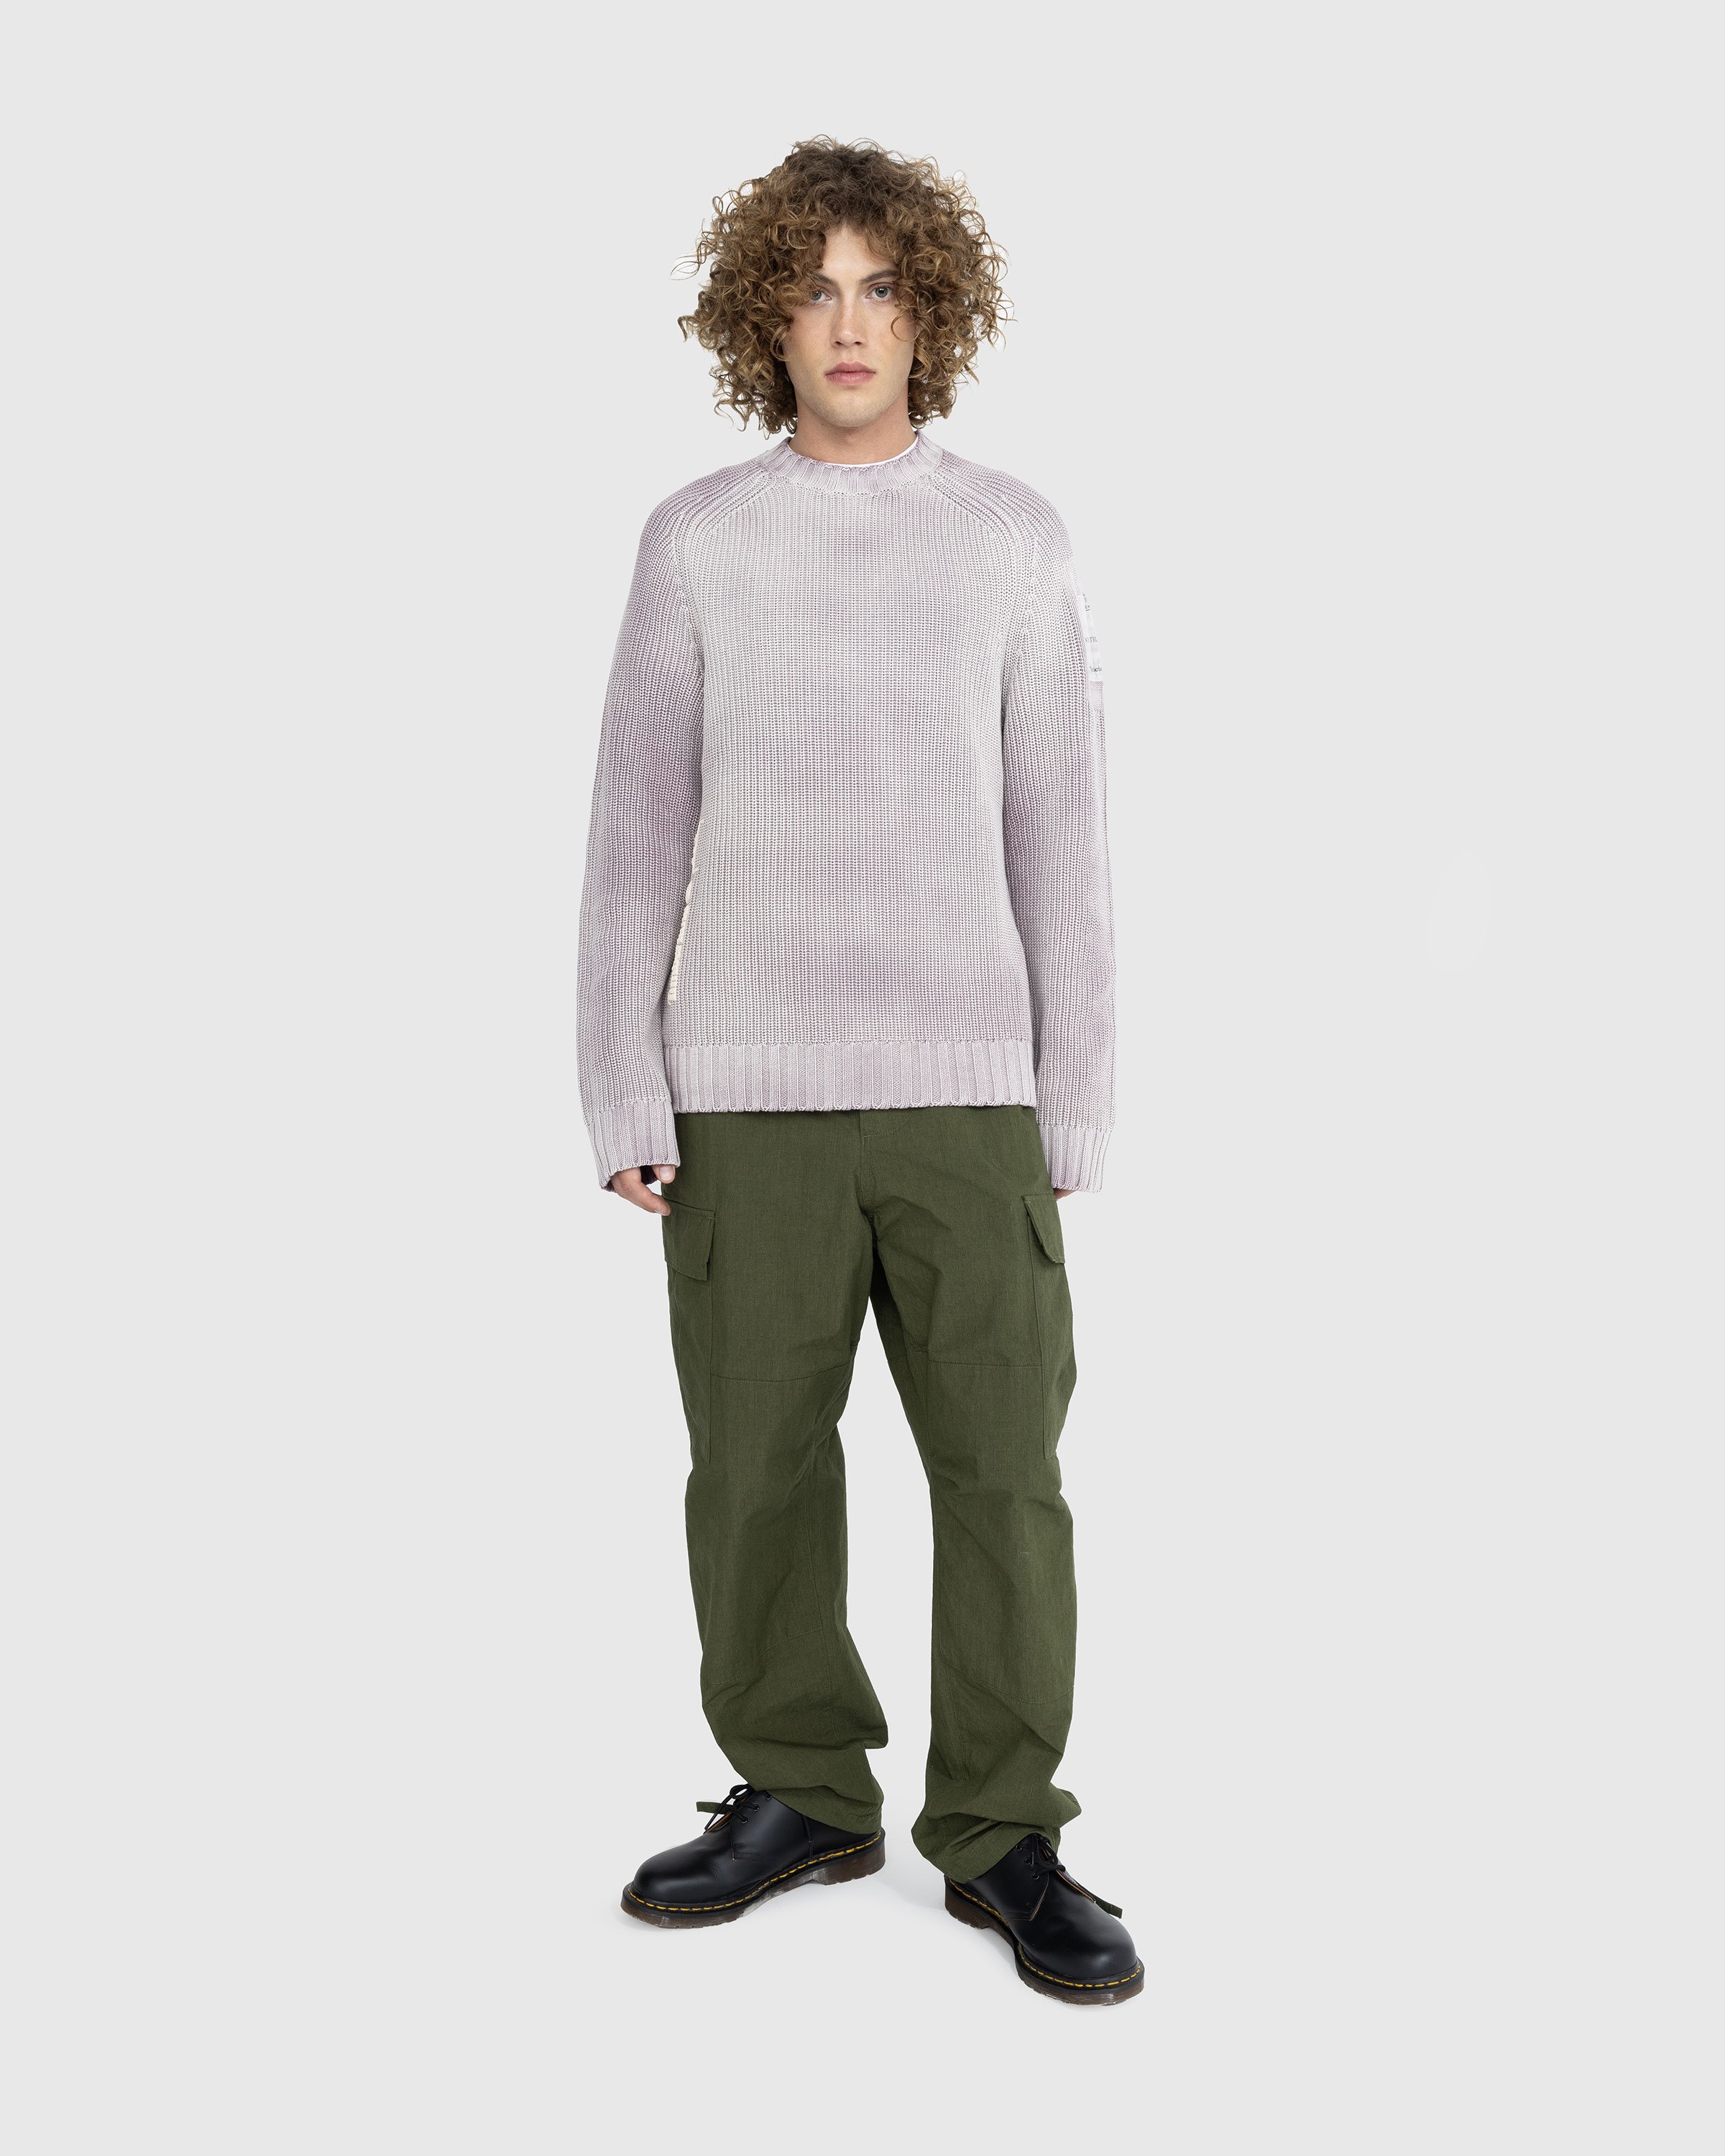 A-Cold-Wall* x Timberland - Fisherman Knit Moonscape - Clothing - Purple - Image 7